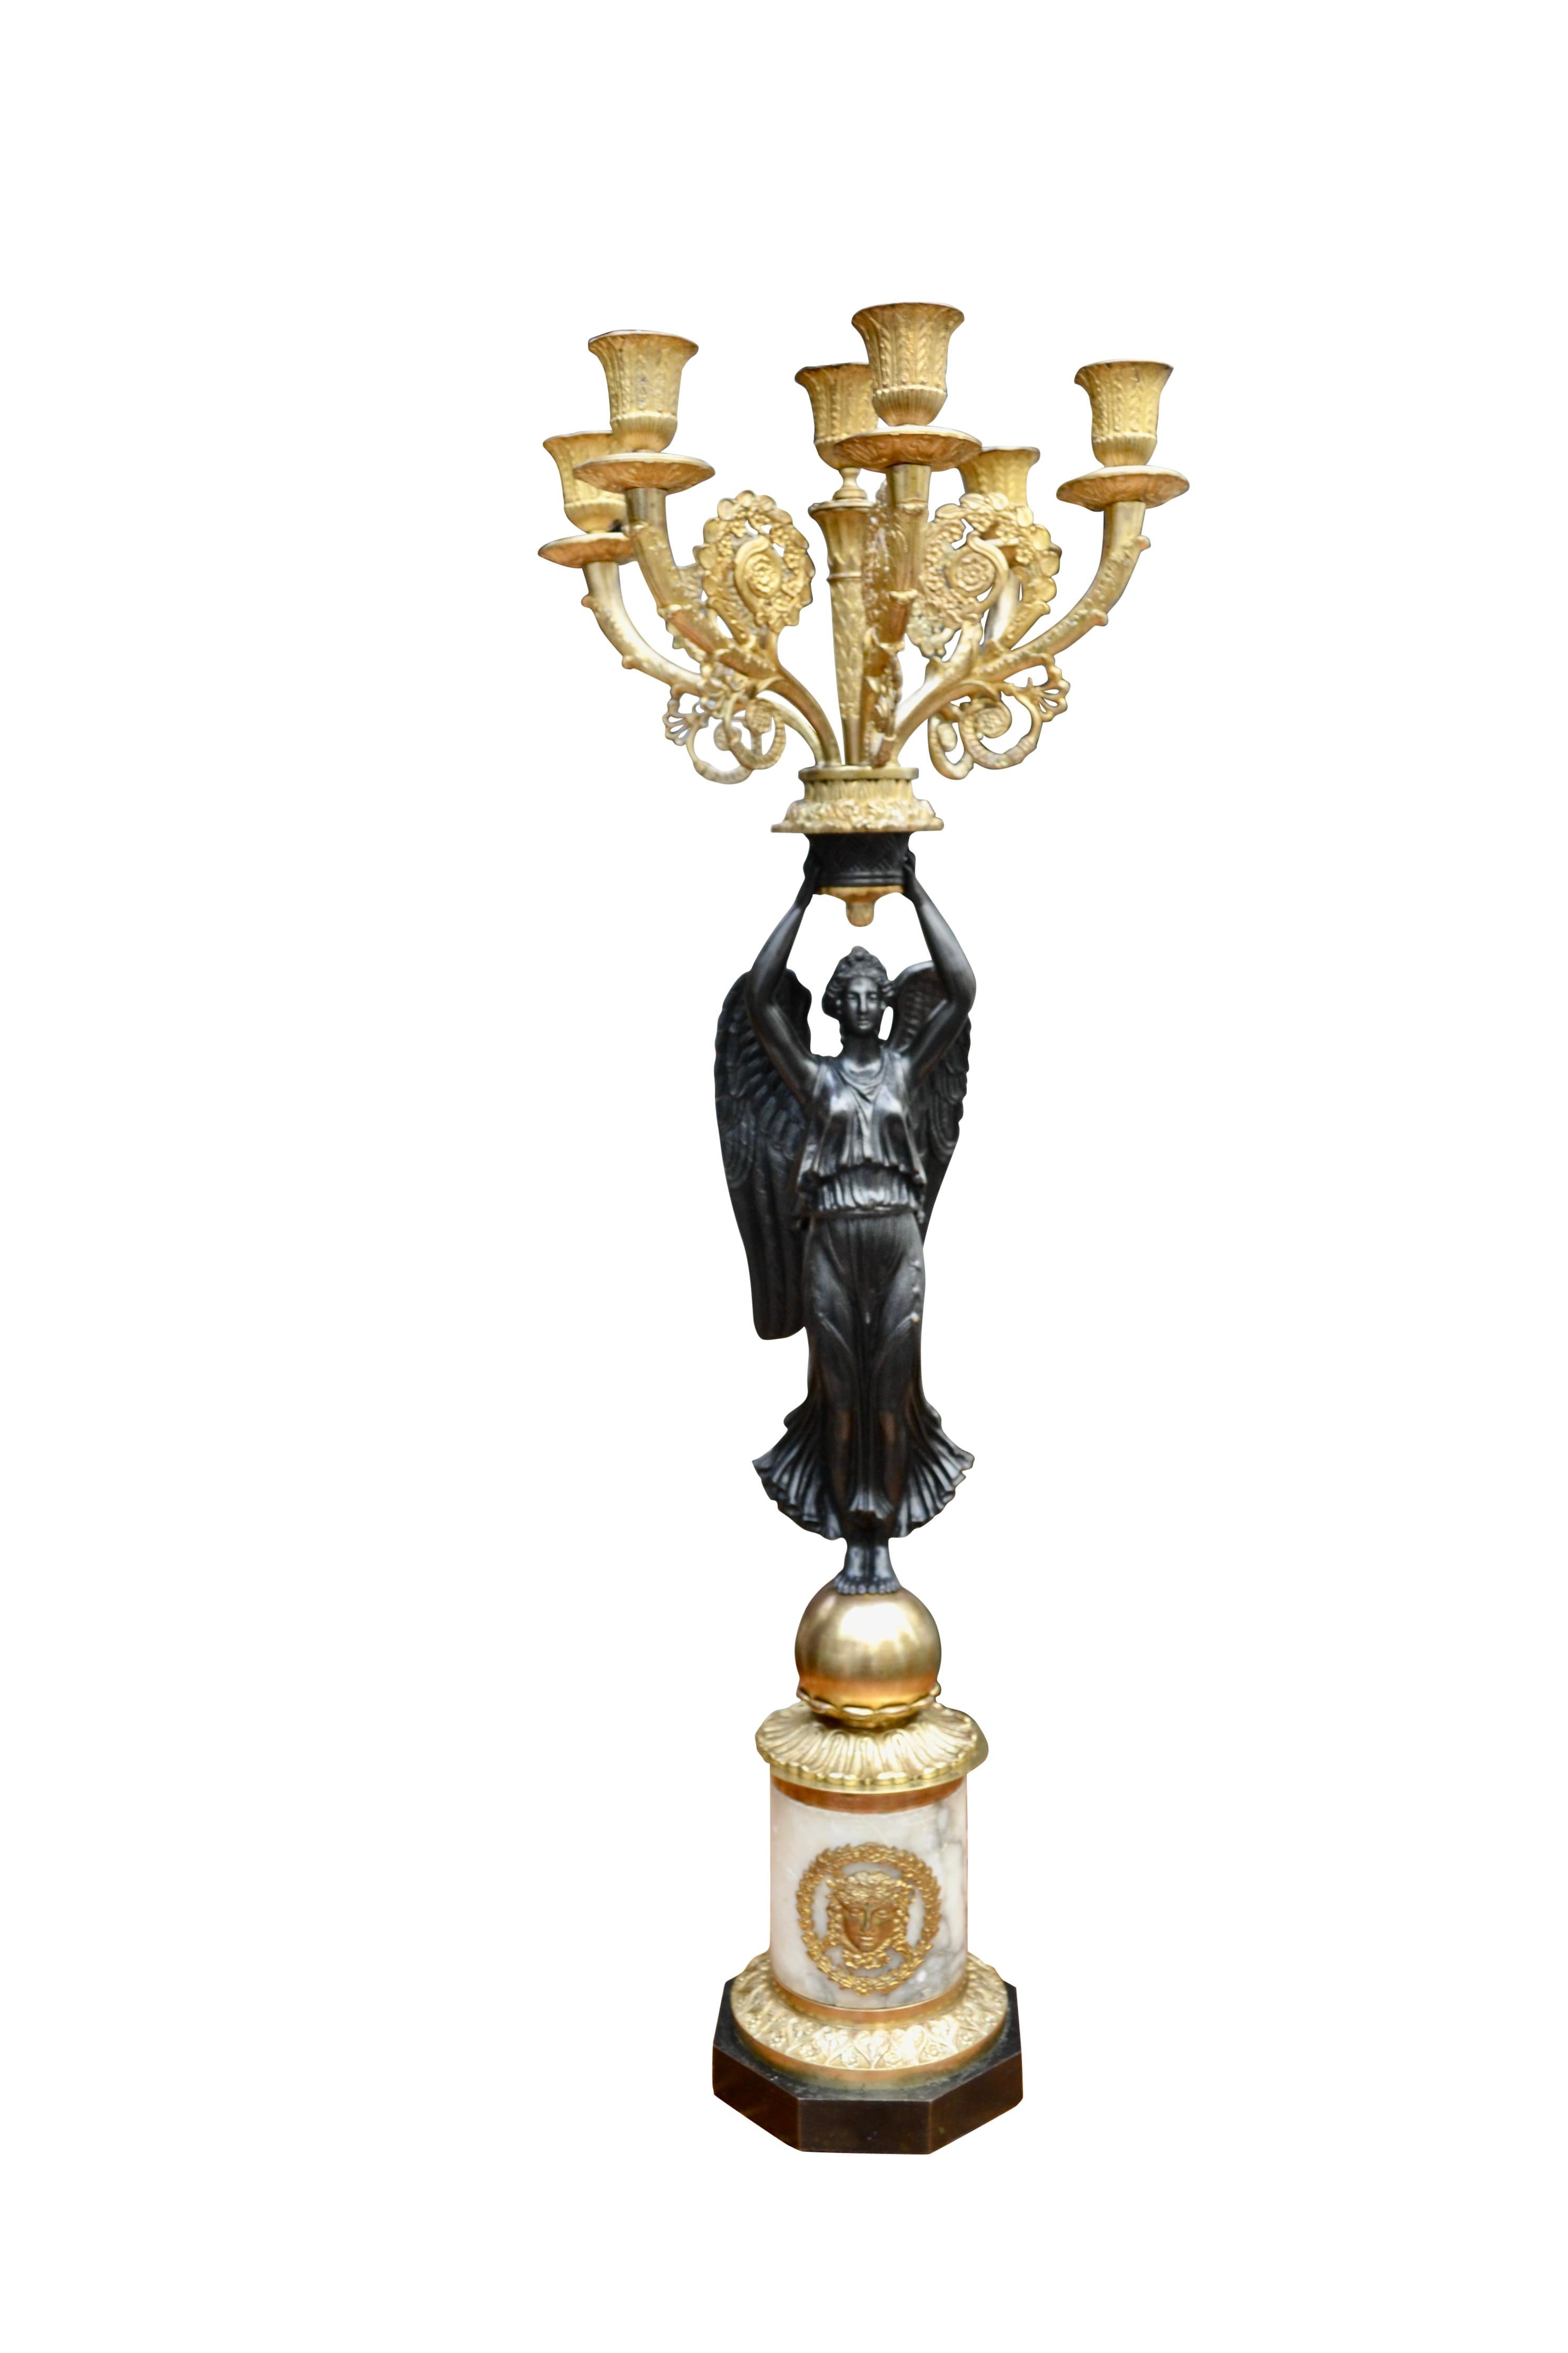 Single French Empire Style Patinated  and Gilt Bronze Winged Victory Candelabra For Sale 9